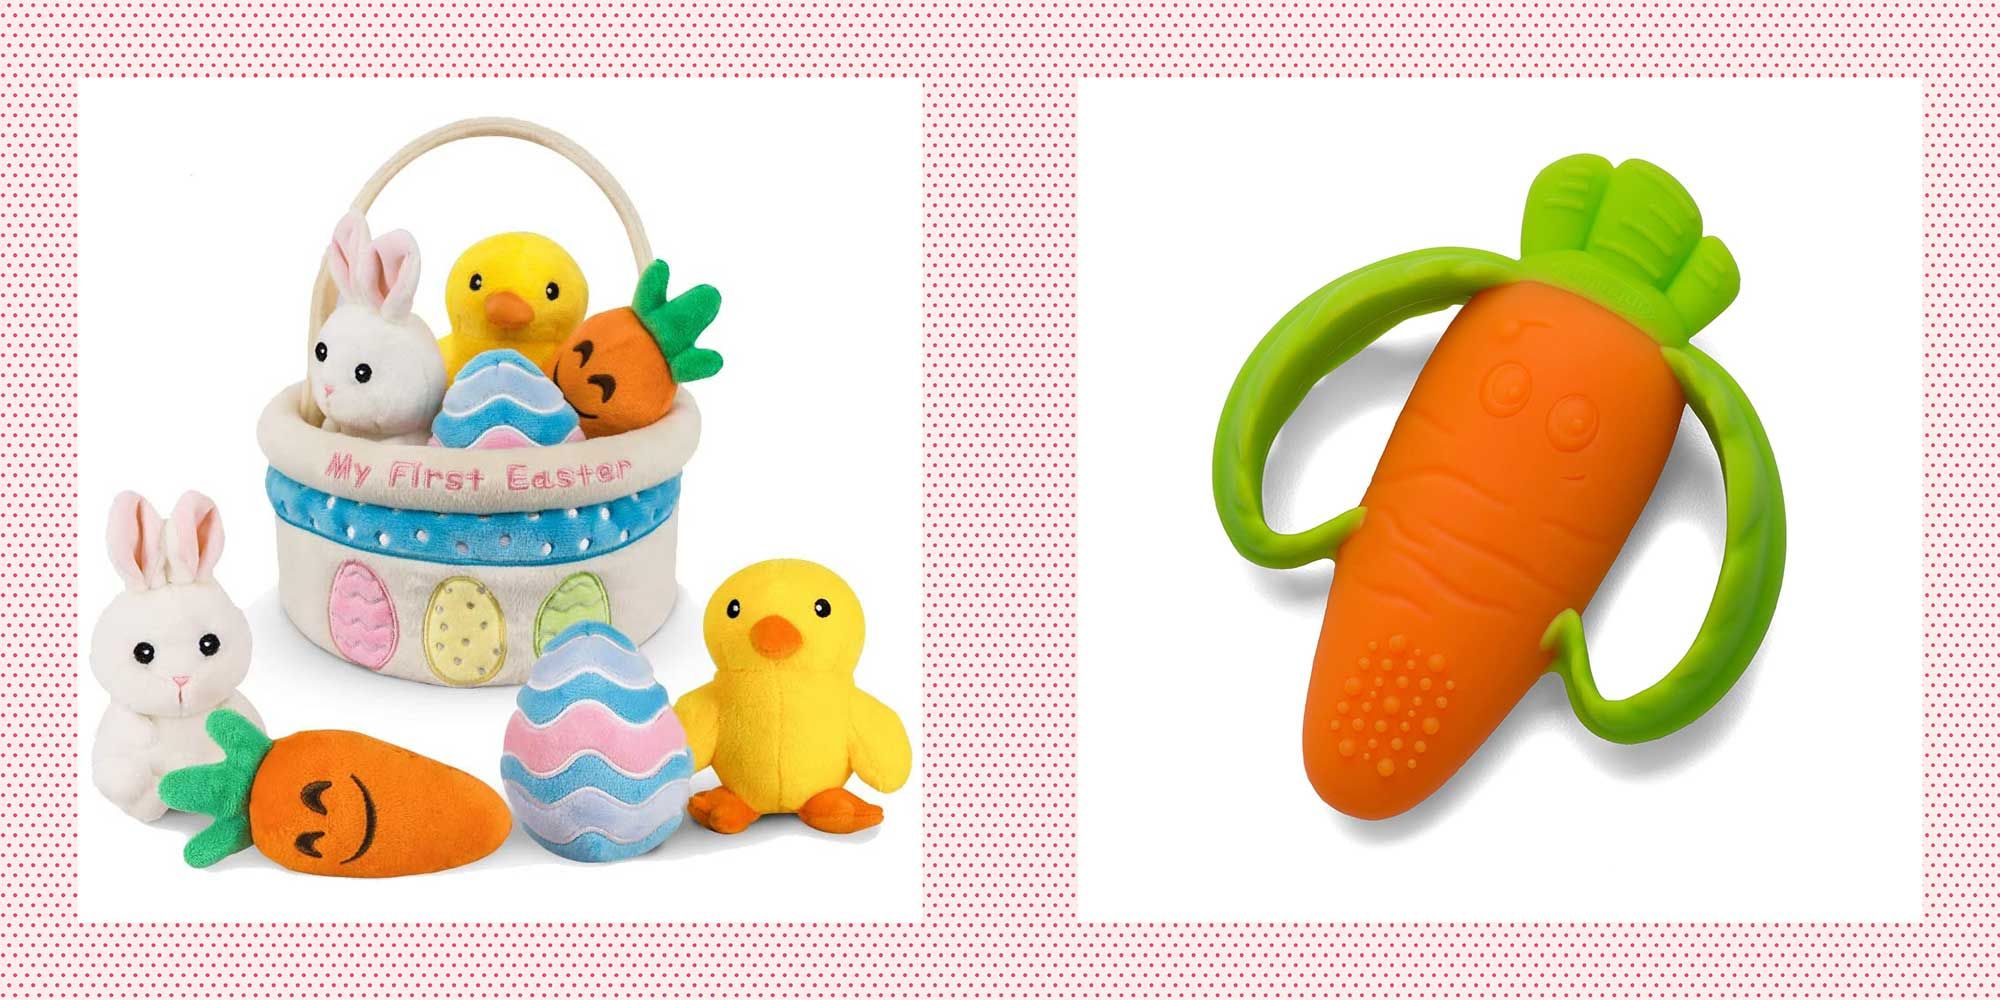 25 Cute Easter Gifts for Babies - Personalized Gifts for Baby's First Easter Basket